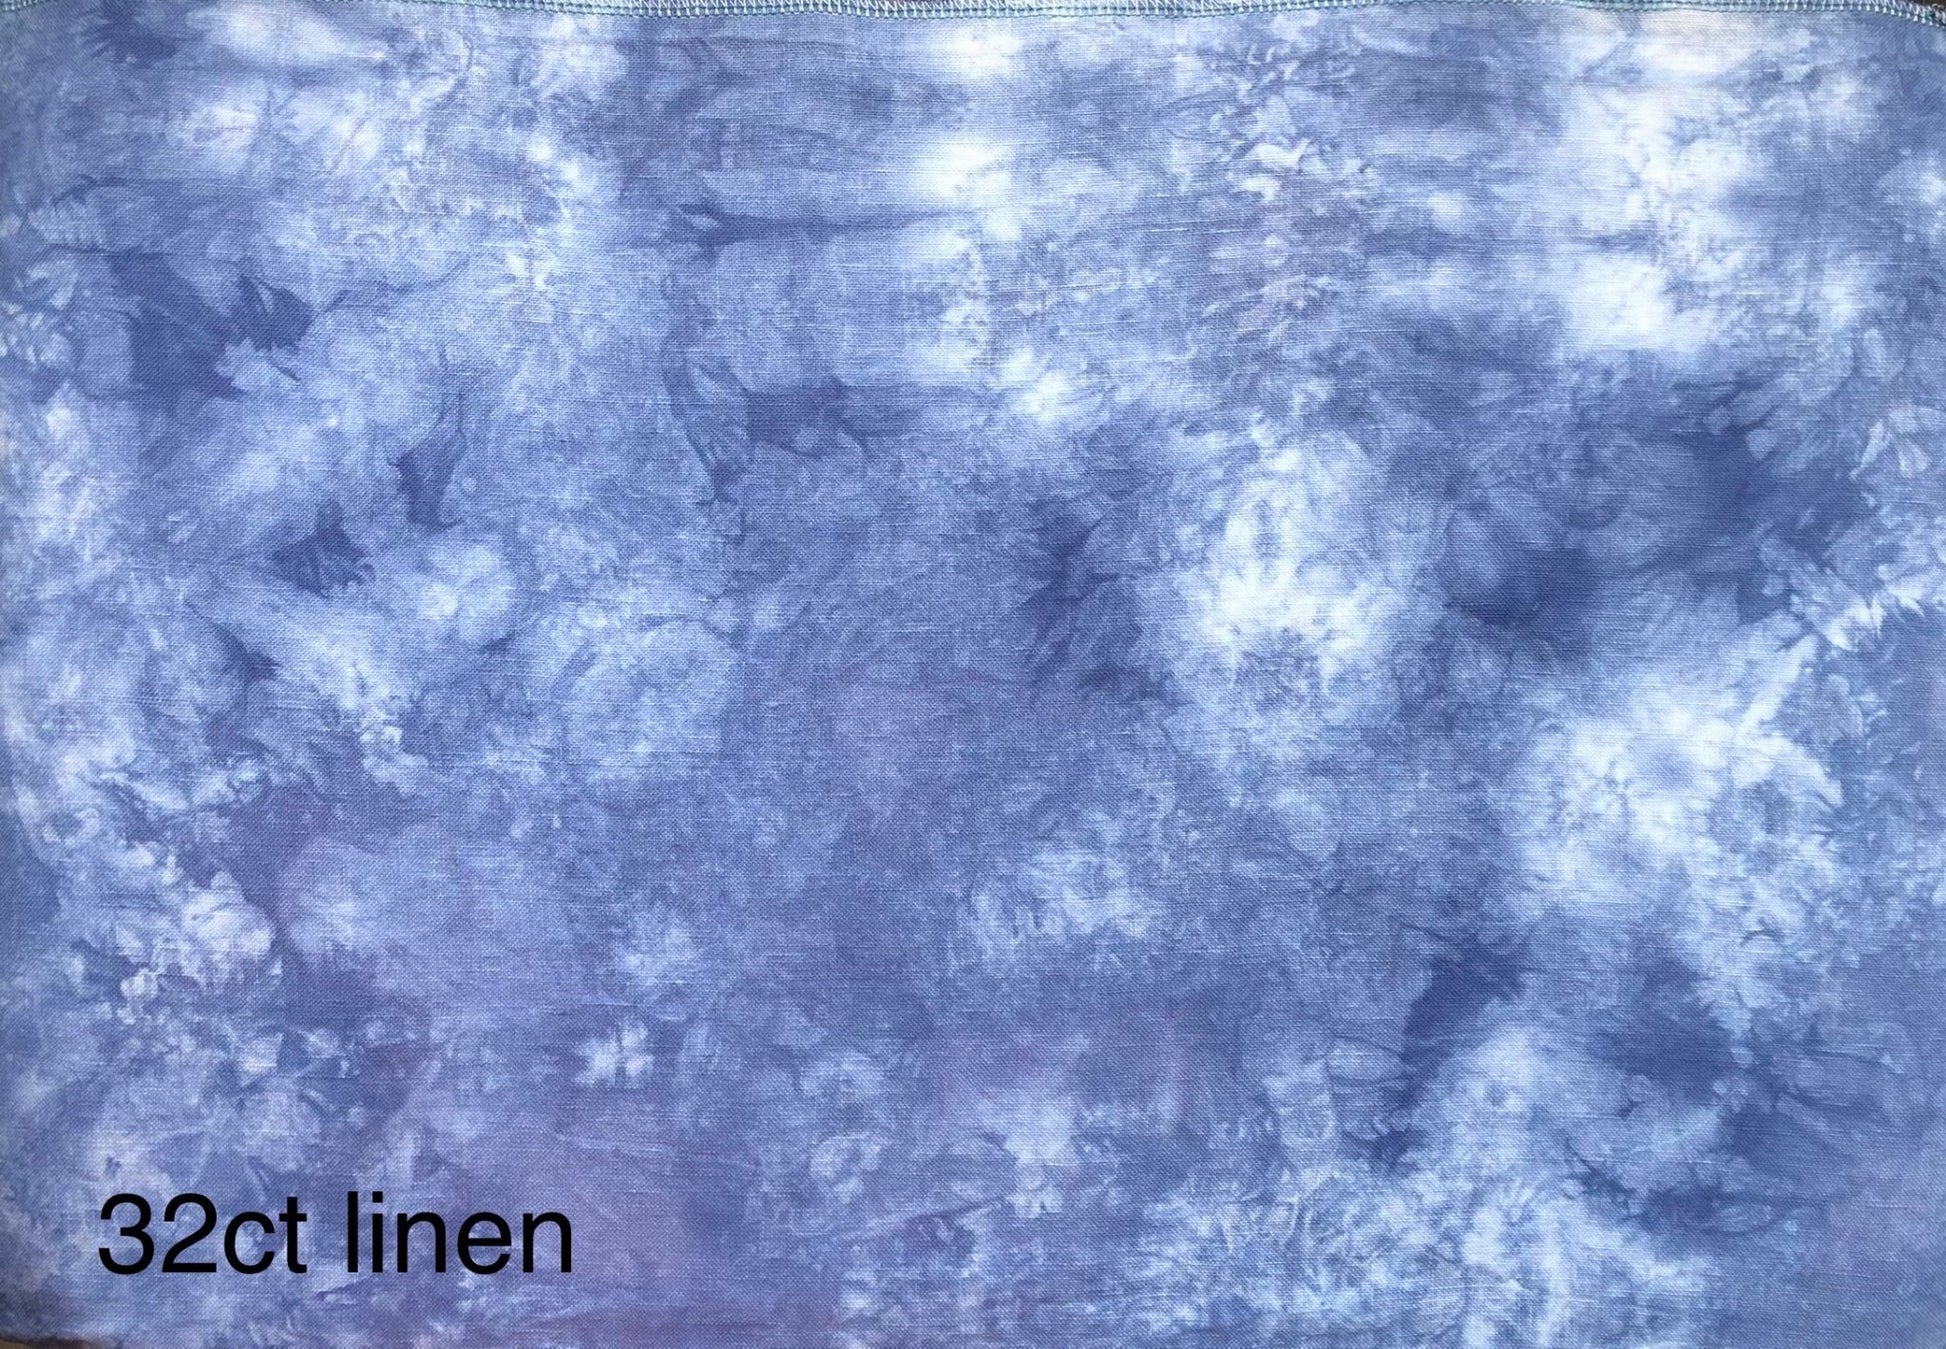 Linen - Delft - Dyeing for Cross Stitch